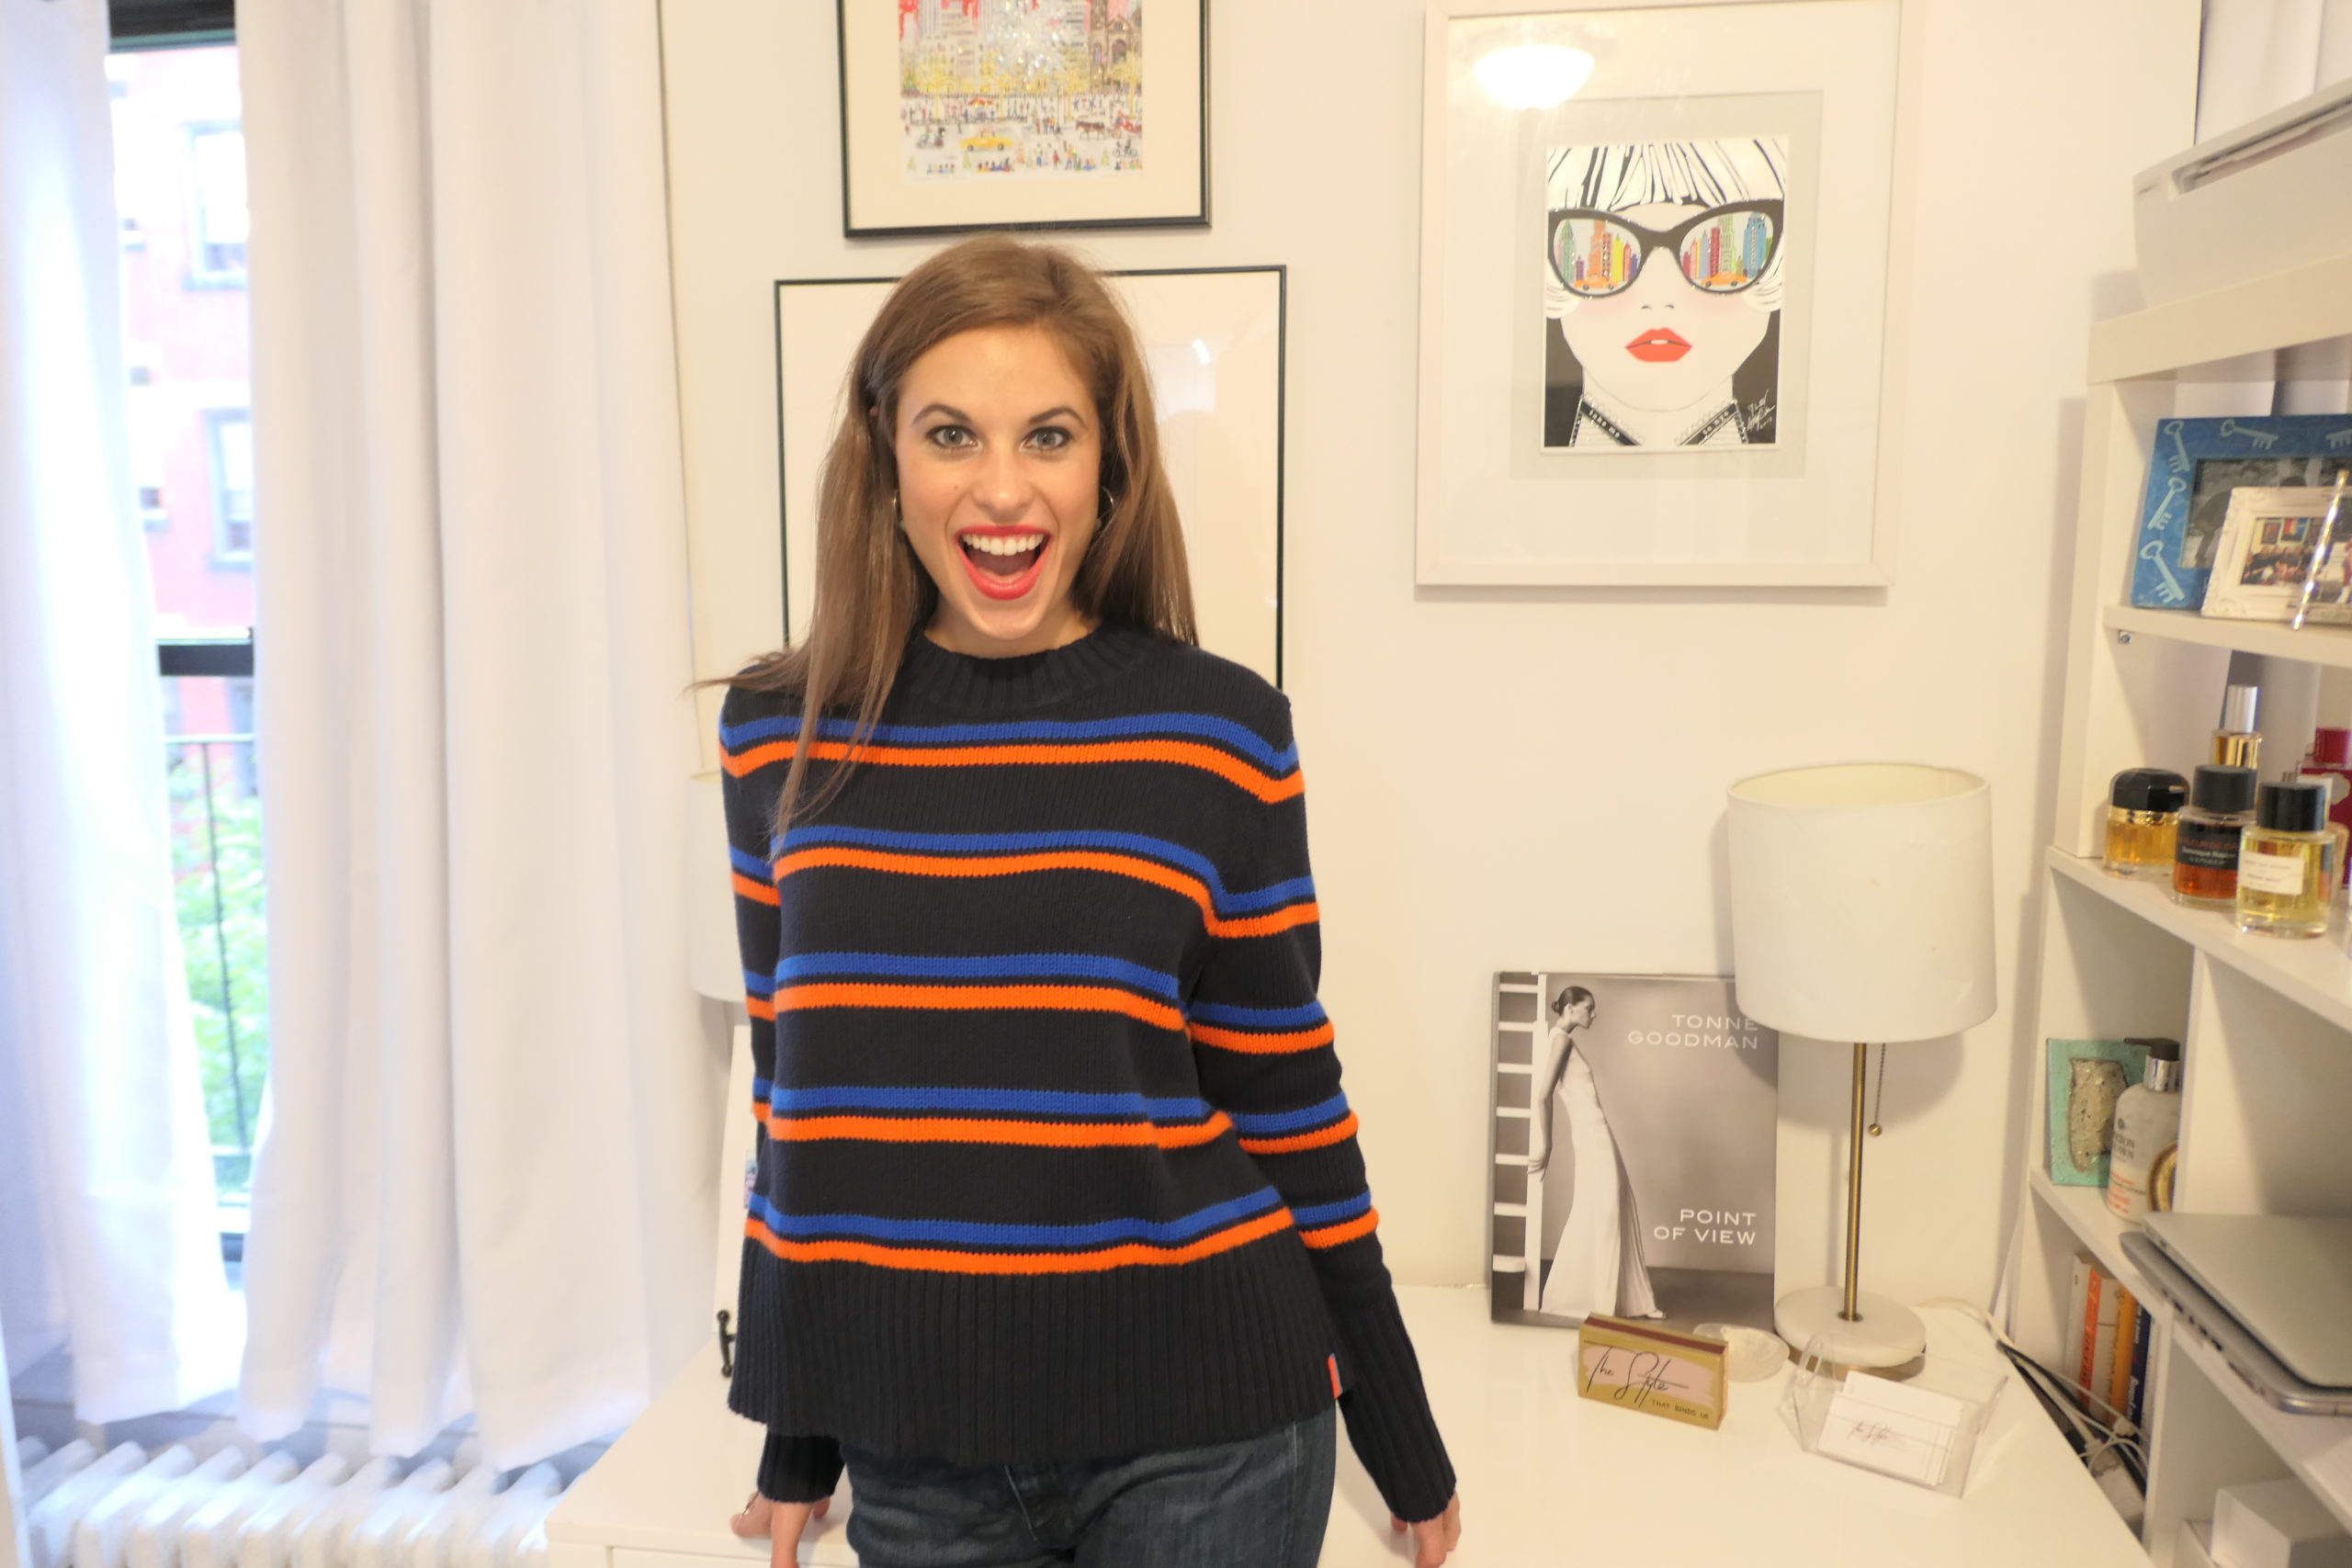 Woman standing at a desk with art hung on the walls with brown hair wearing a black, blue & red striped sweater and jeans. She is smiling